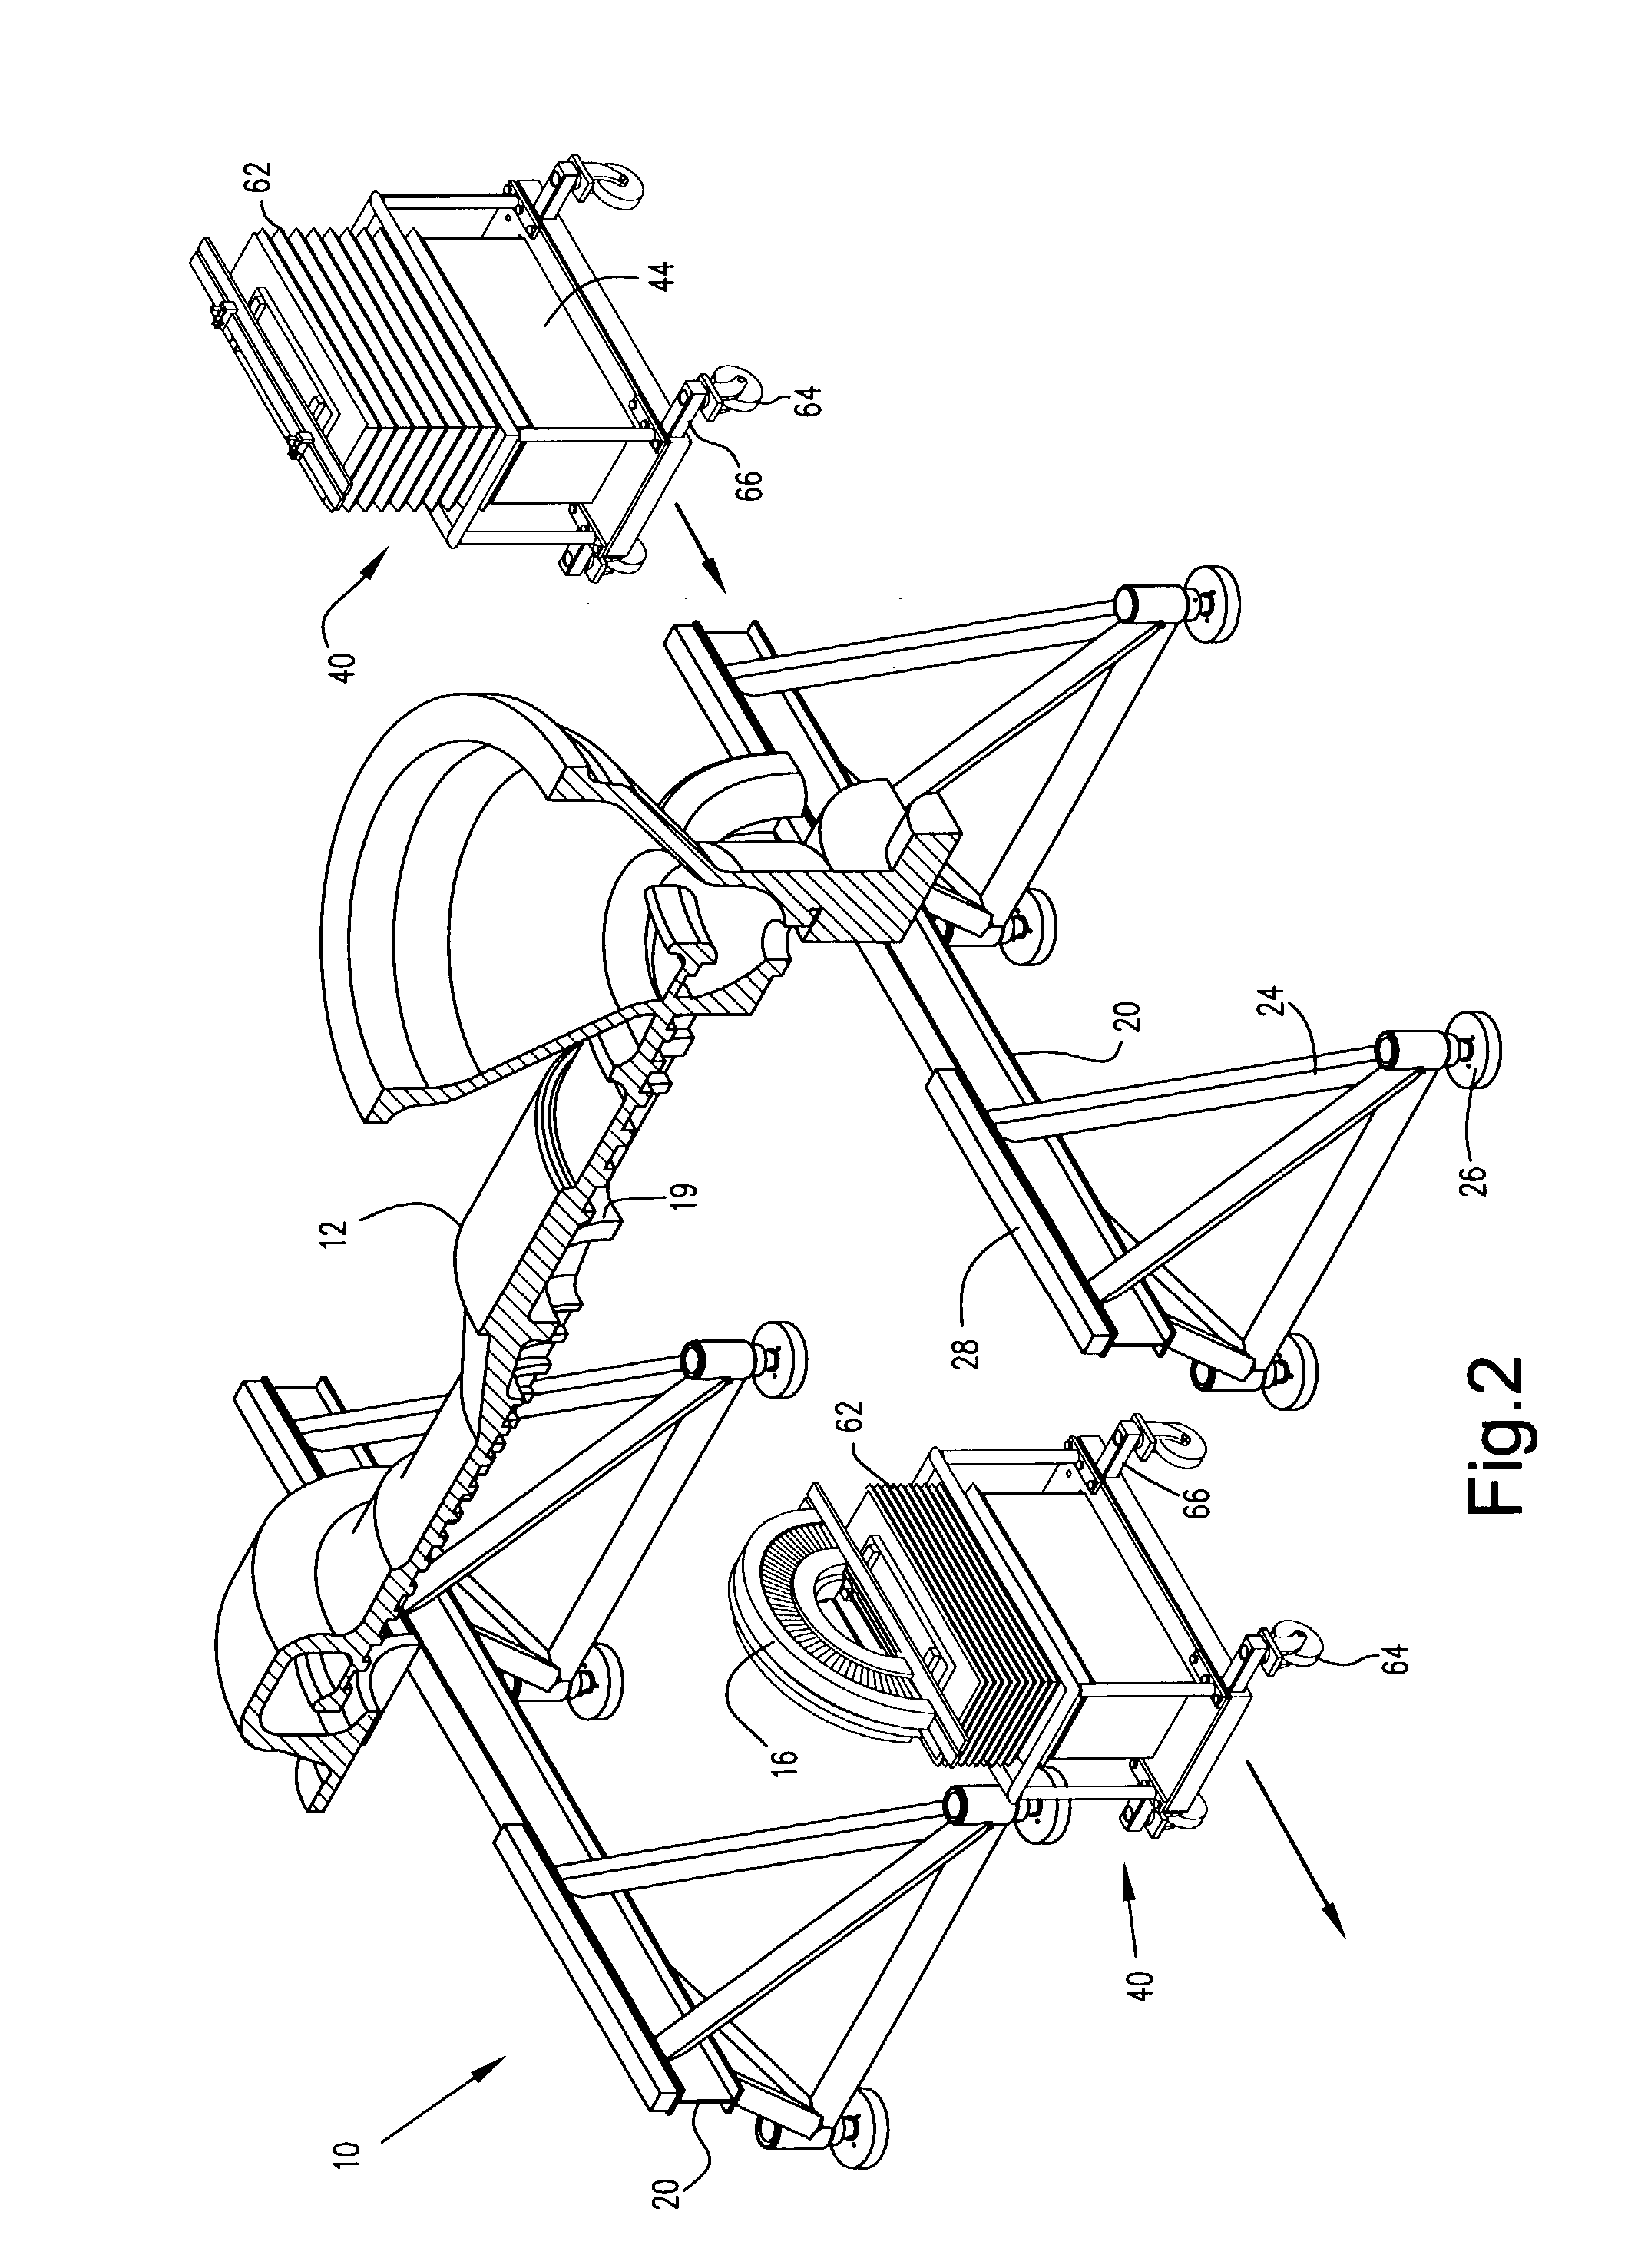 Apparatus and methods for removing and installing an upper diaphragm half relative to an upper shell of a turbine